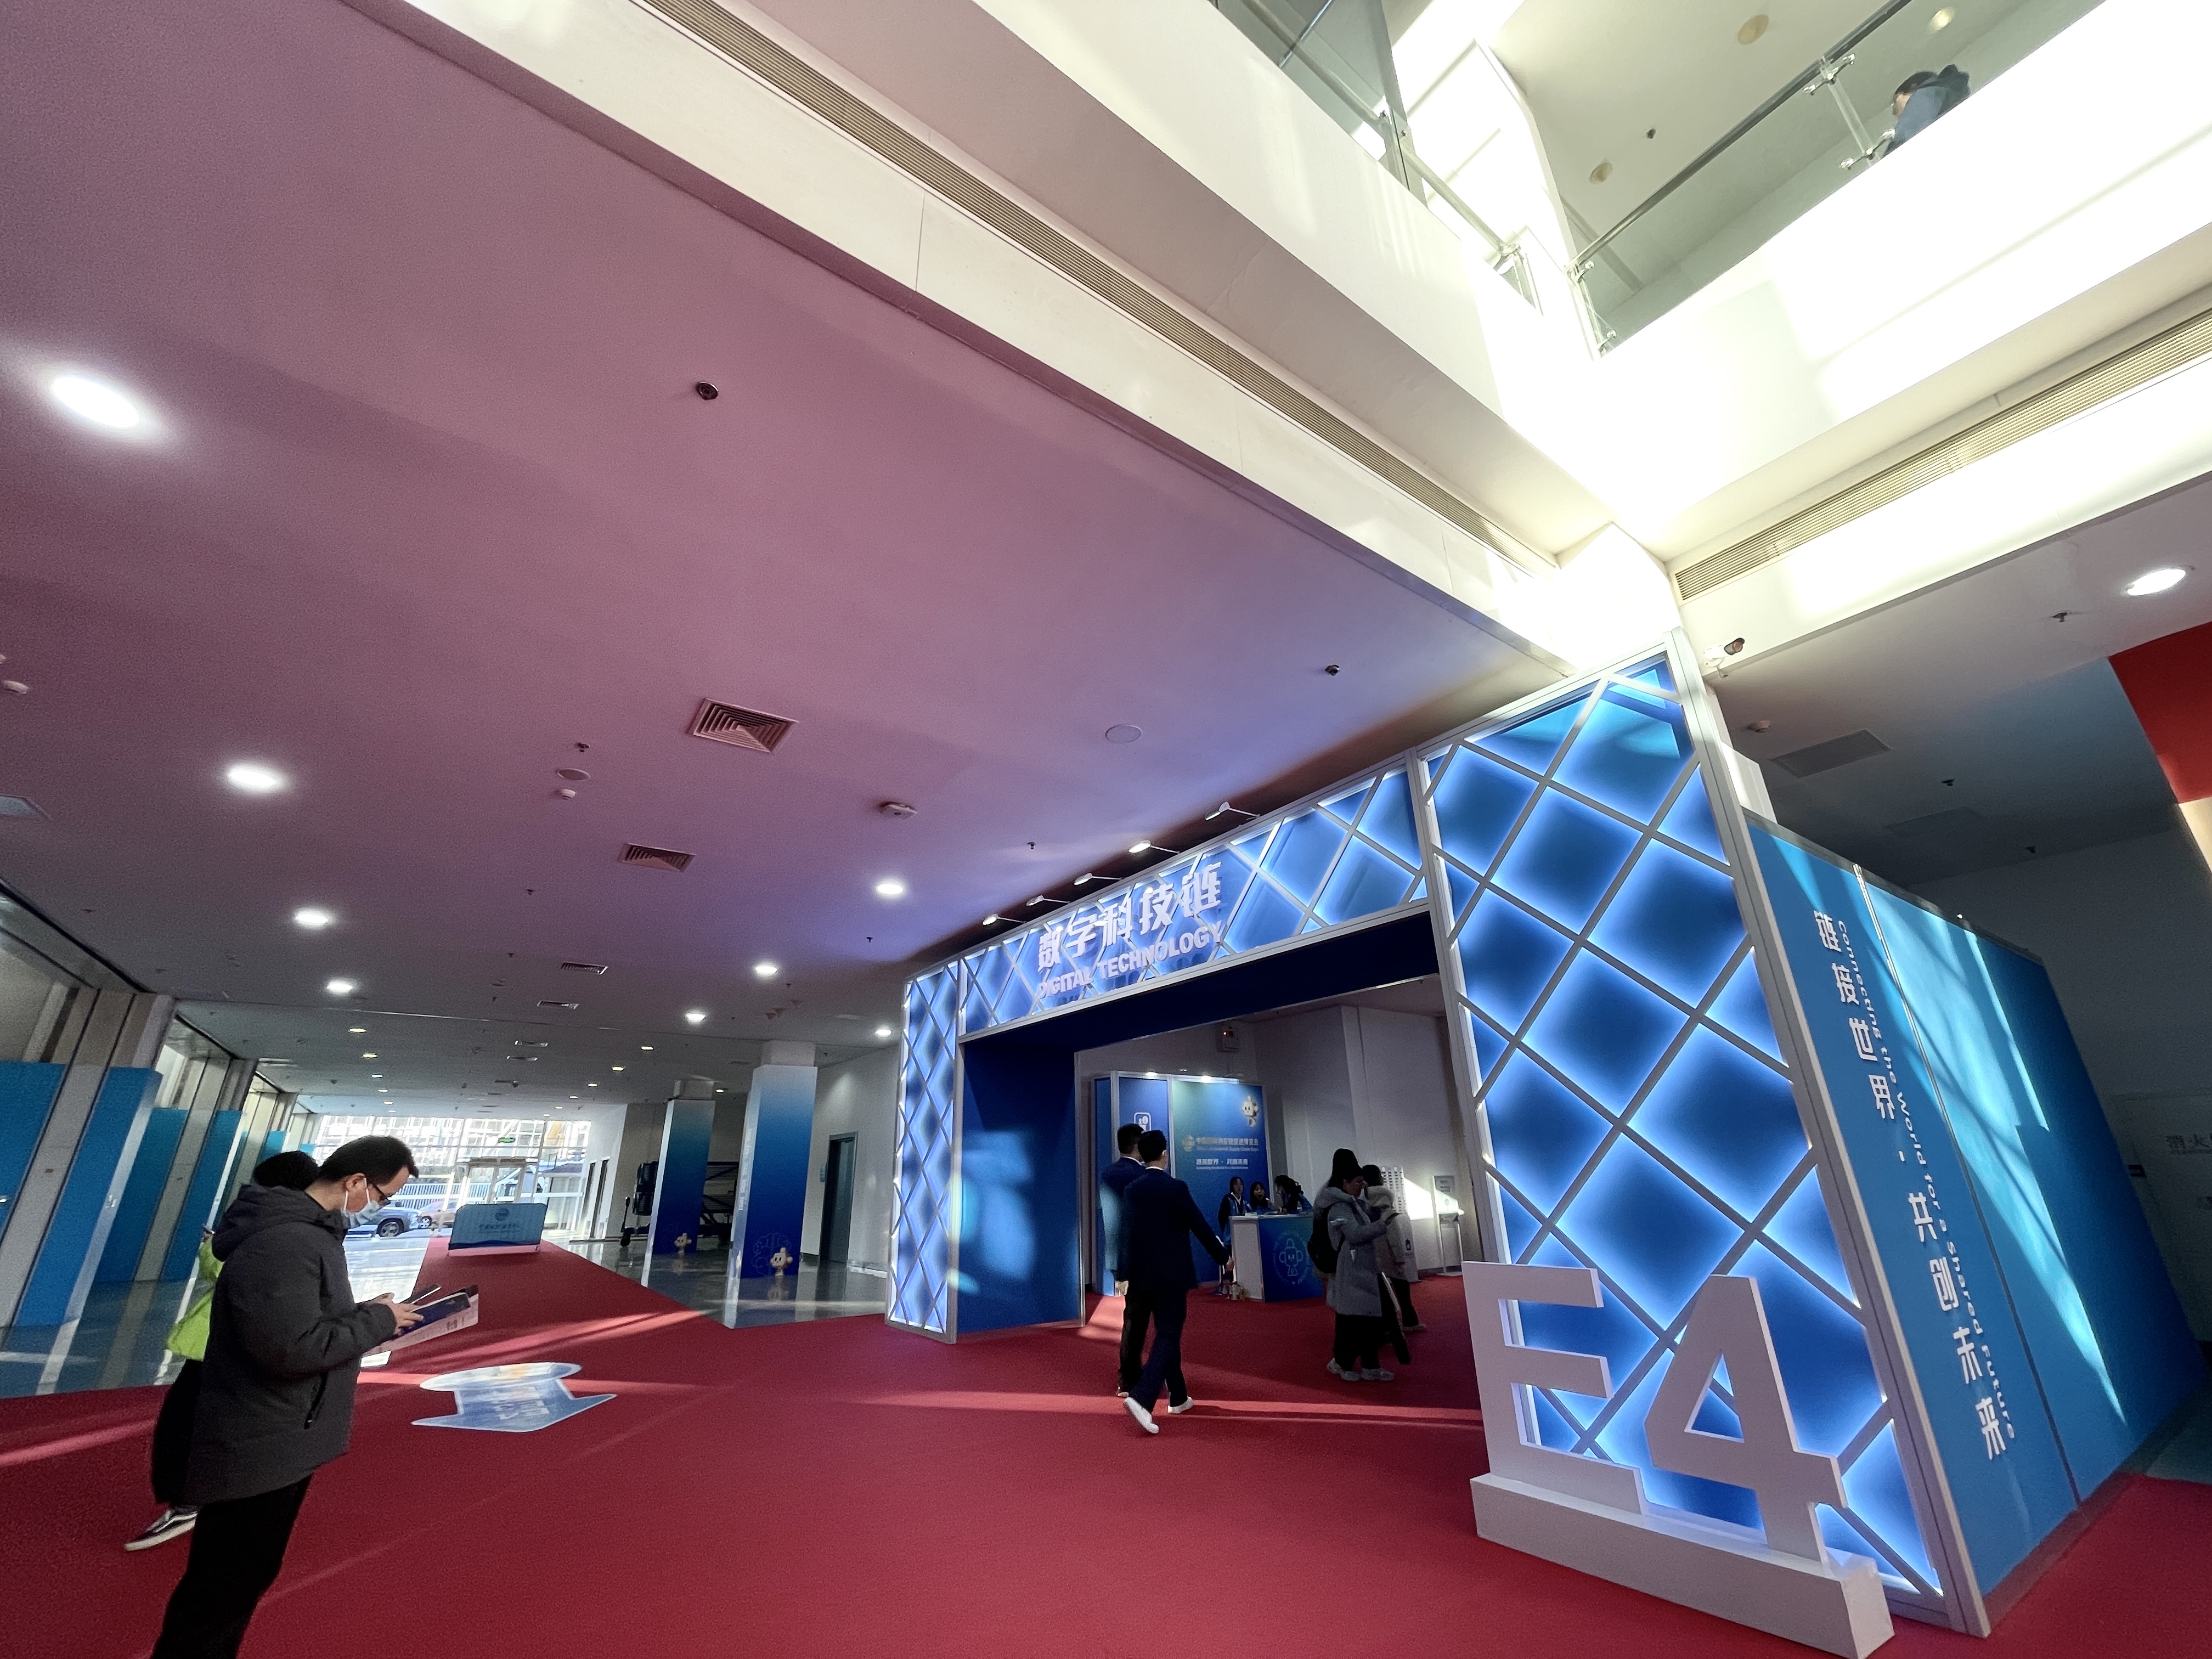 The entrance to the exhibition area features the supply chain of digital technology at the China International Supply Chain Expo, Beijing, China, November 29, 2023. /CGTN